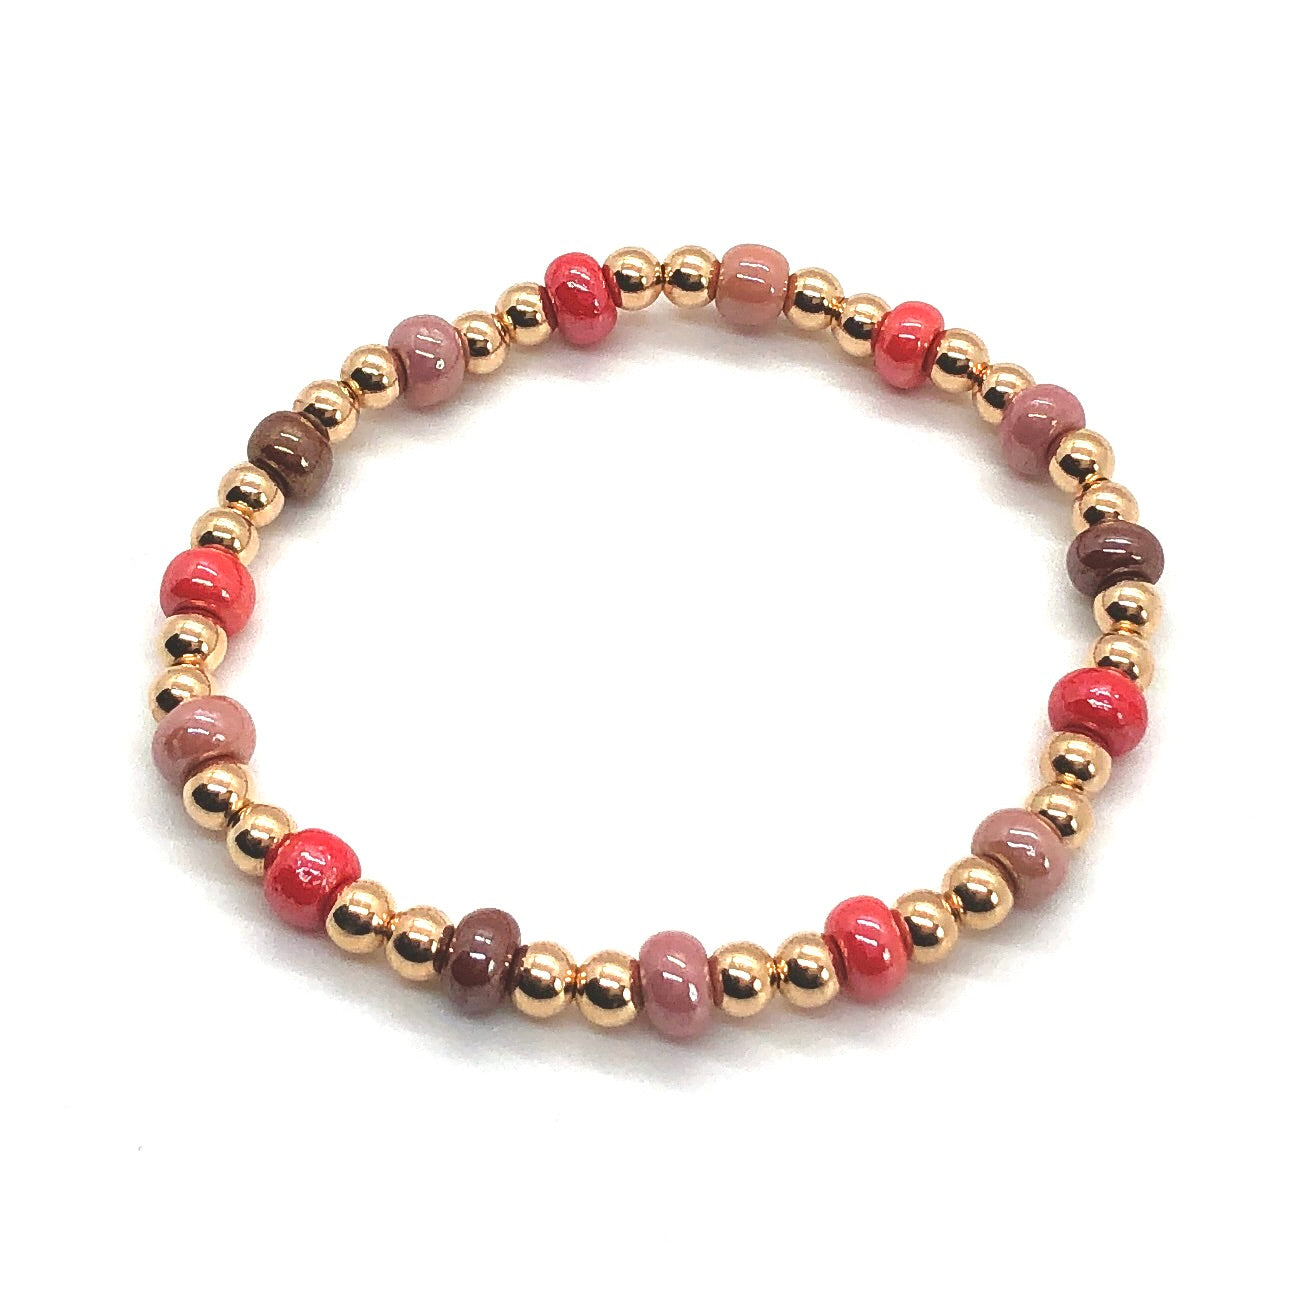 Rose gold beaded bracelet with alternating red and pink chunky beads on stretch cord.